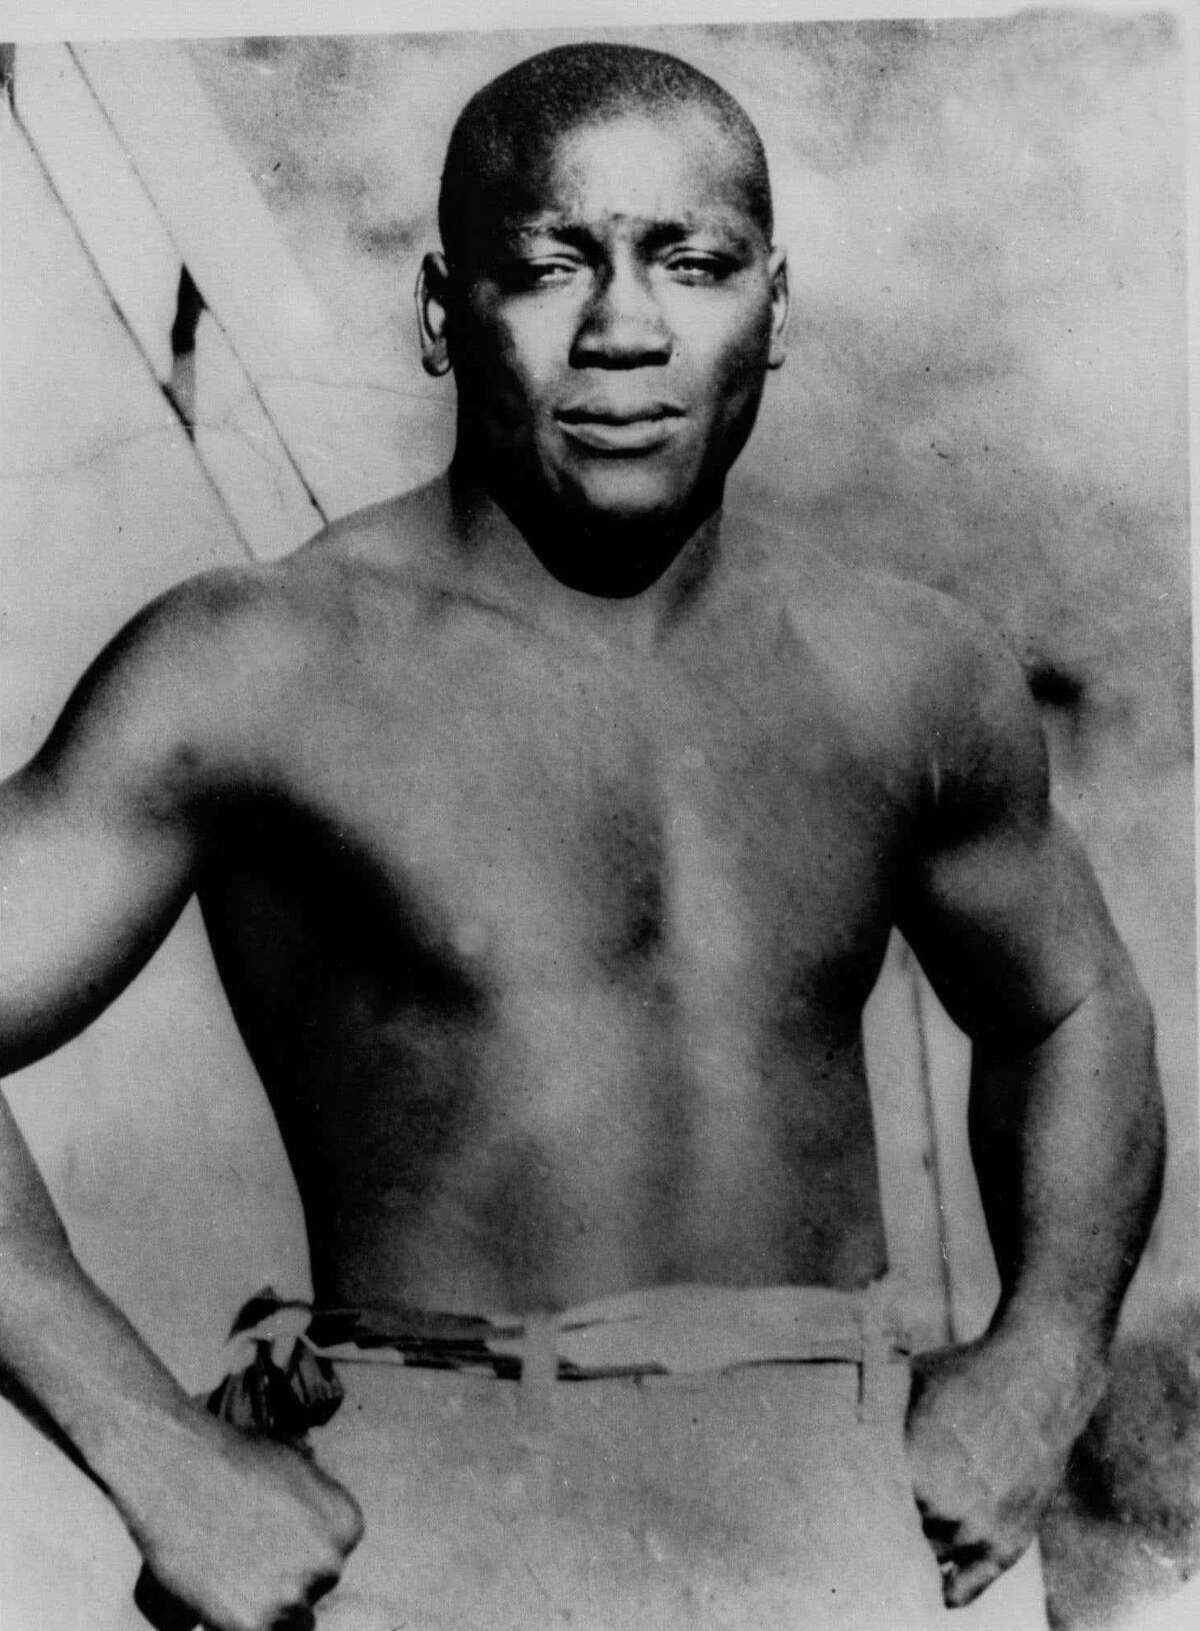 Jack Johnson, born in Galveston, but with ties to Montgomery County, became the first Black boxer to win the heavyweight boxing title. He appears in this undated photo. In the documentary "Unforgivable Blackness," by Ken Burns in 2005, Johnson is revealed as a complicated figure who embodied the Black man’s struggle to be free in this country.